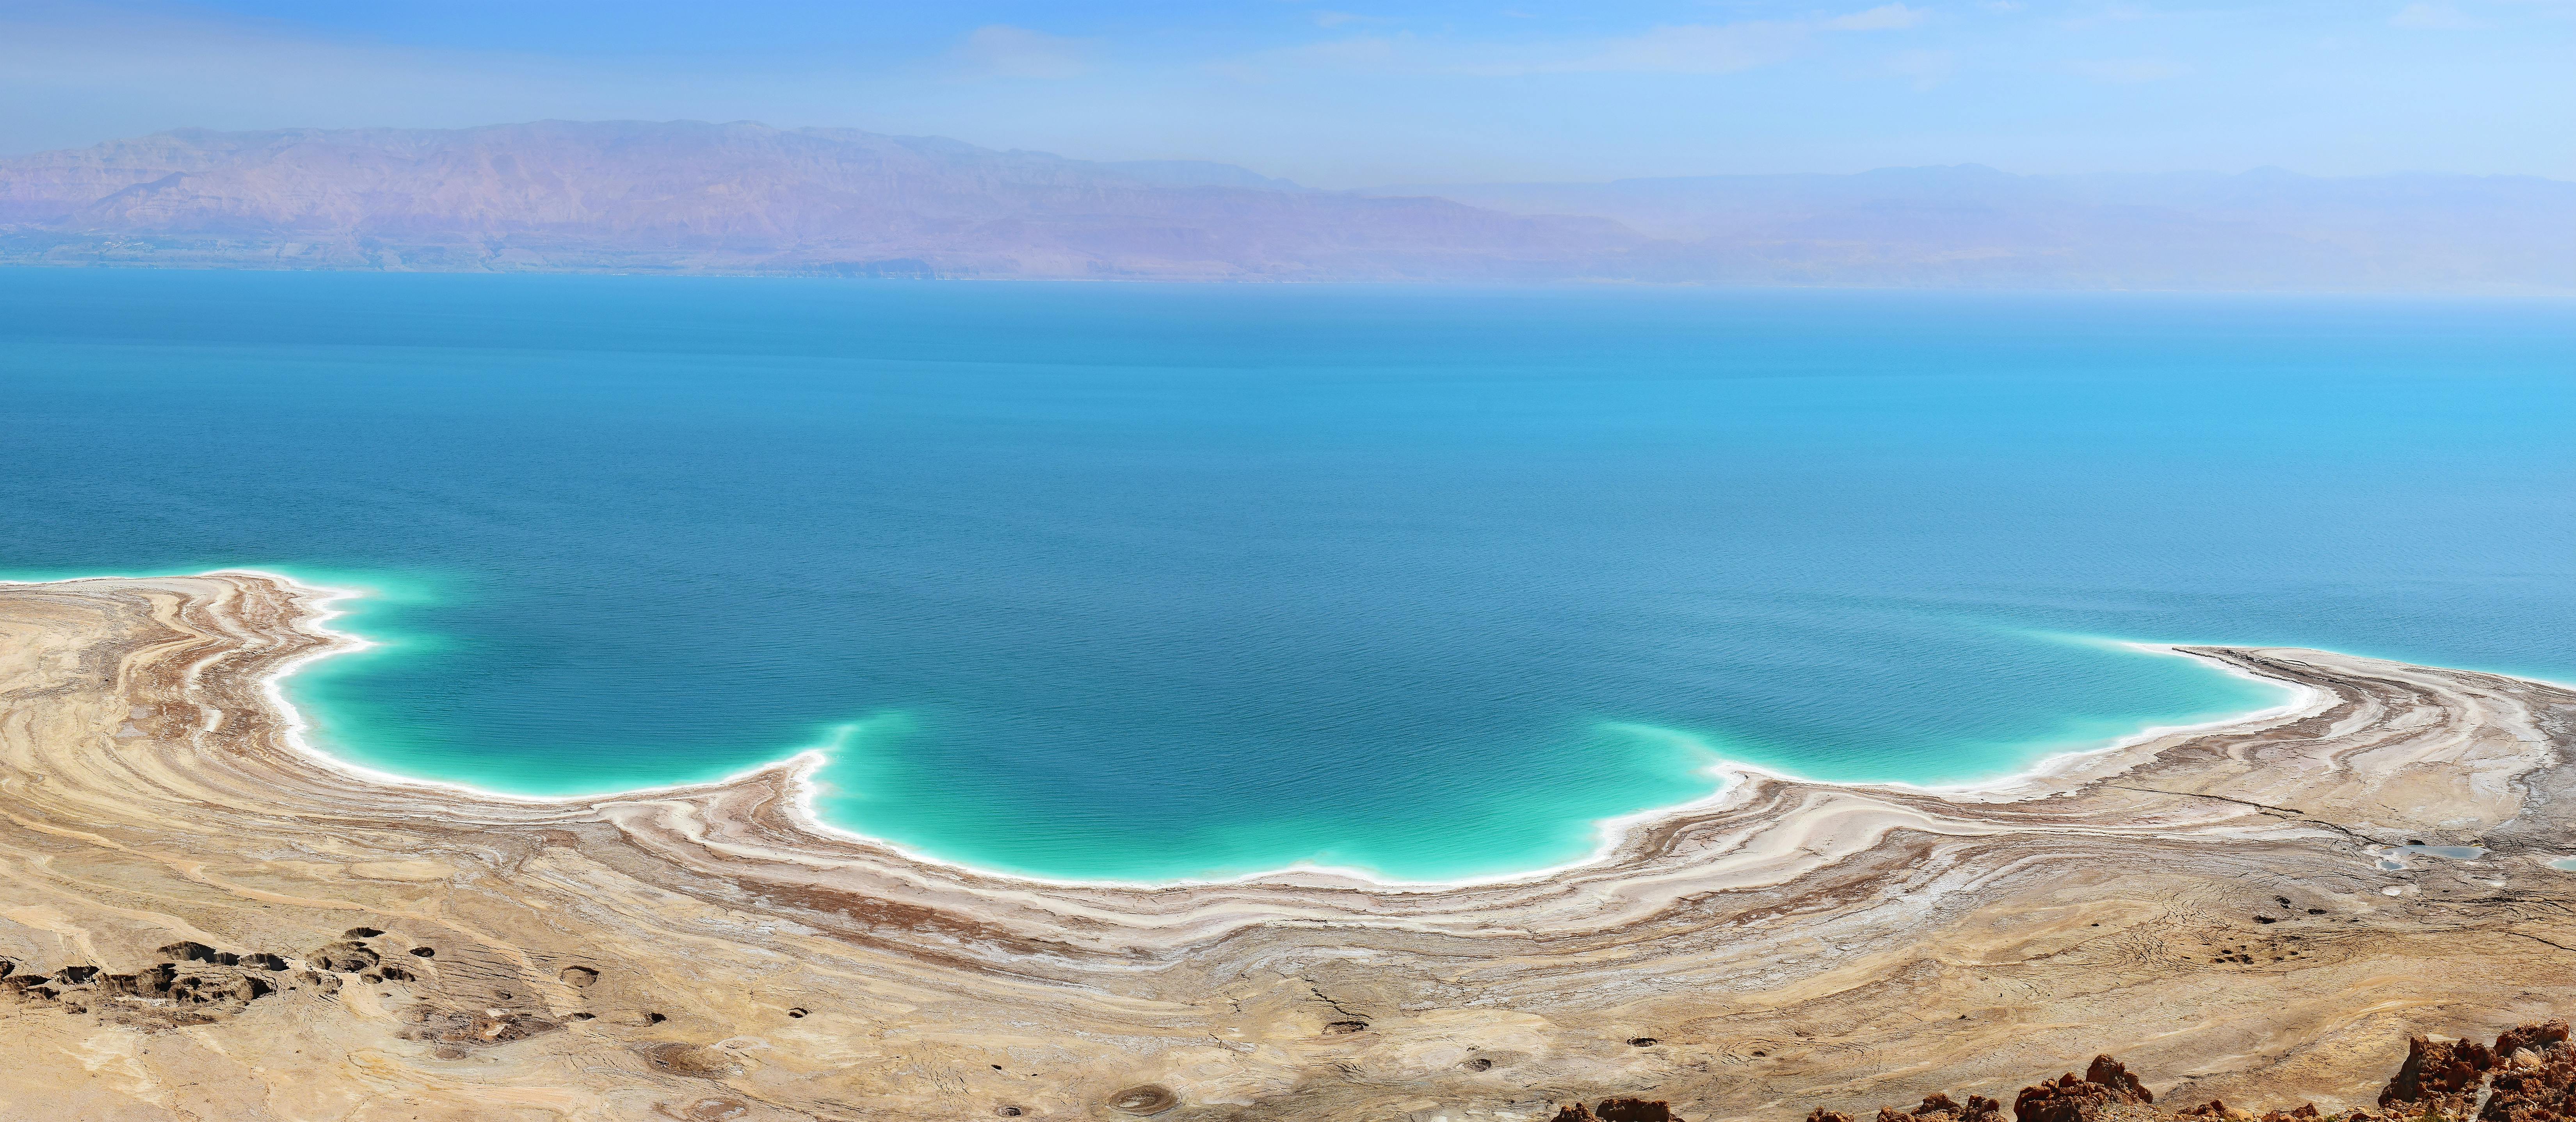 Dead Sea relaxation tour from Tel Aviv Musement